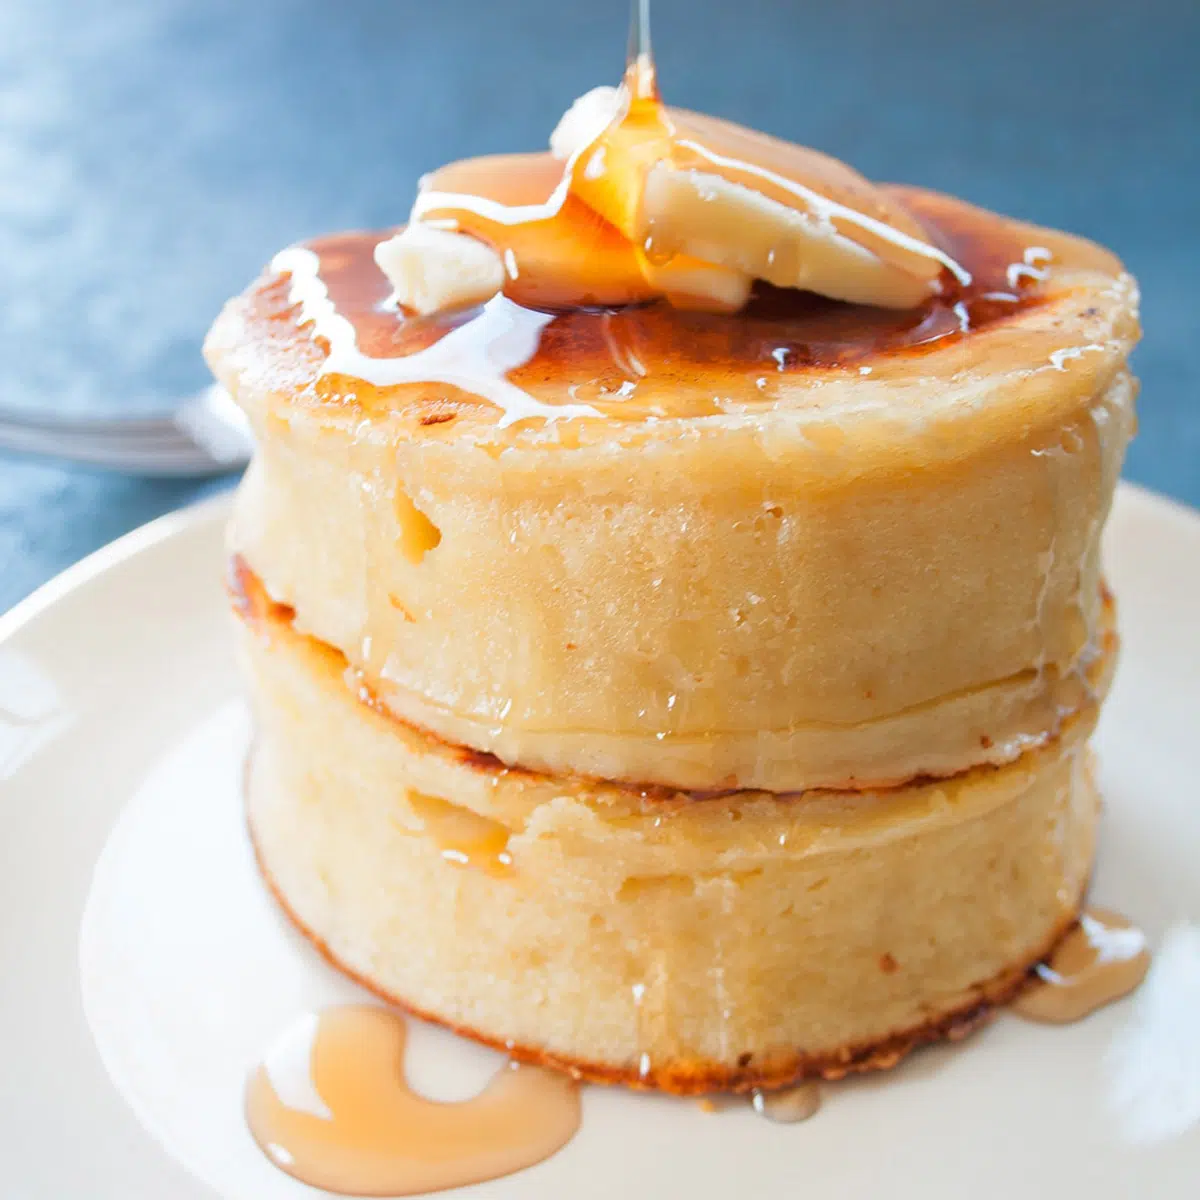 Stacked Japanese fluffy pancakes with butter and syrup.